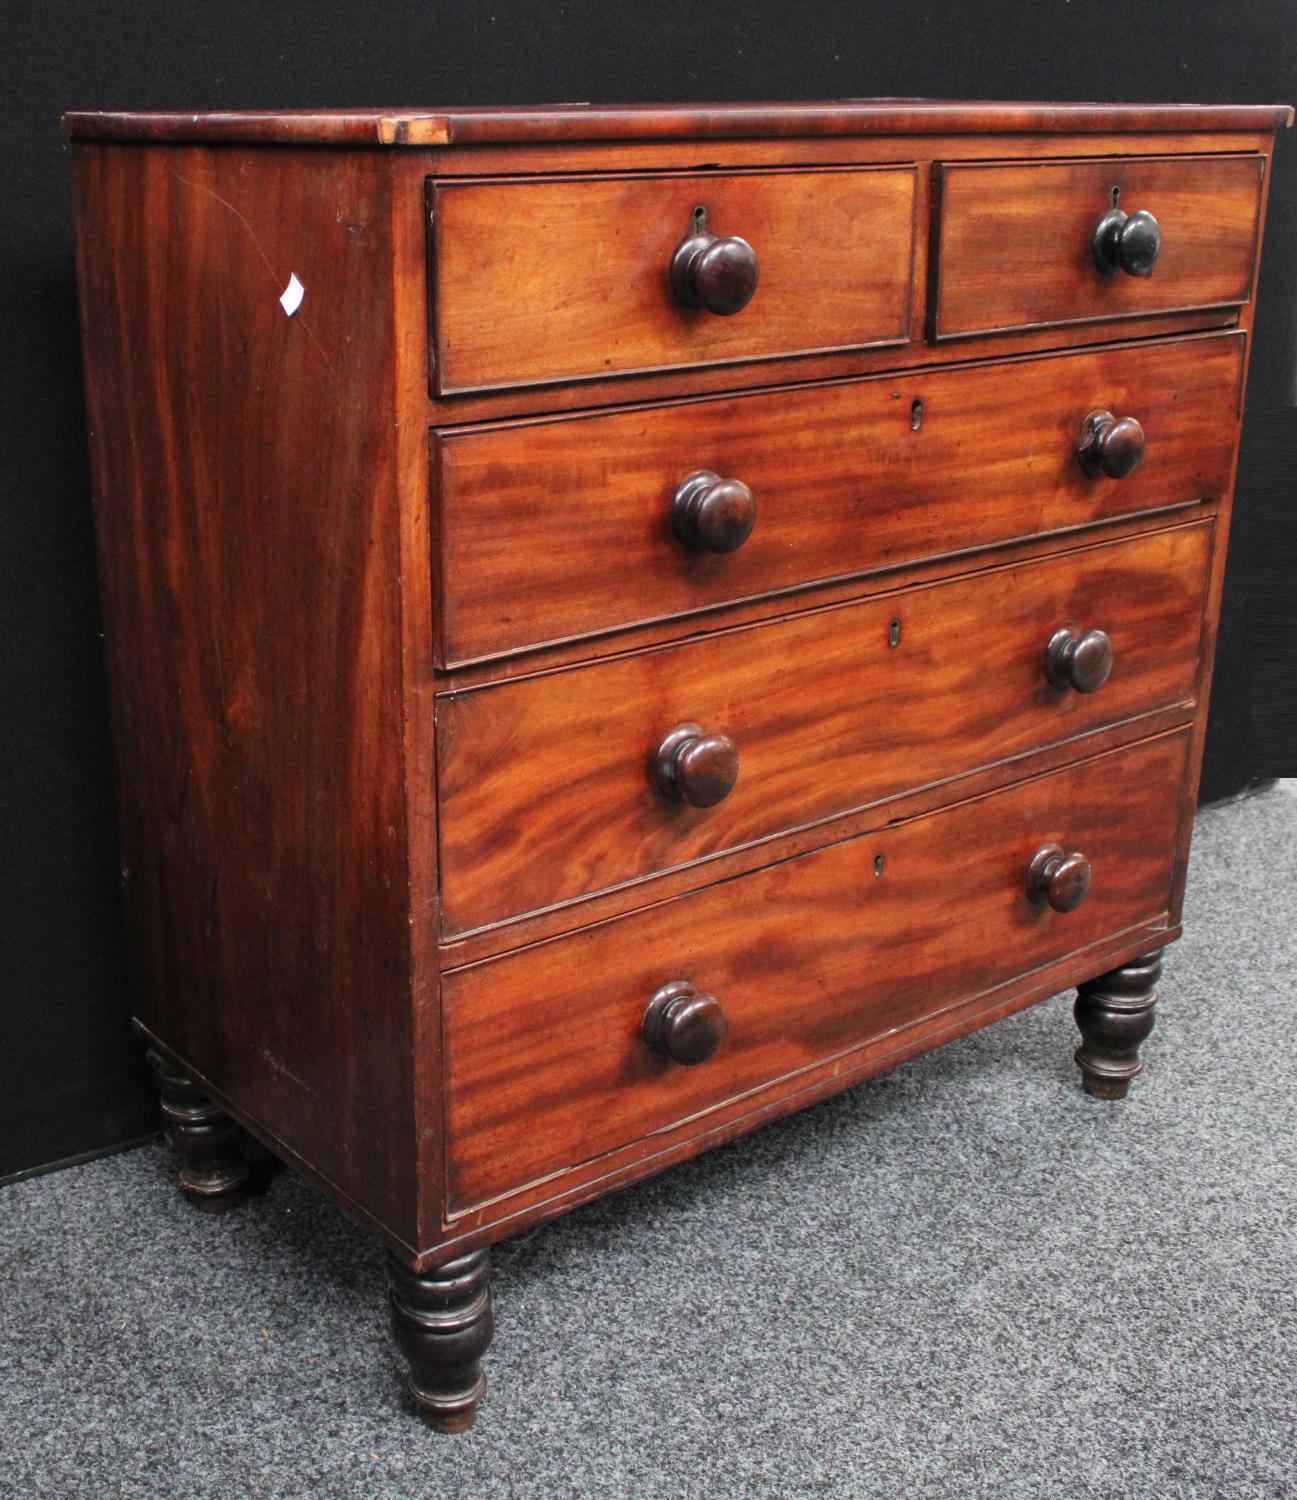 An early Victorian mahogany chest of drawers, c. - Image 2 of 7